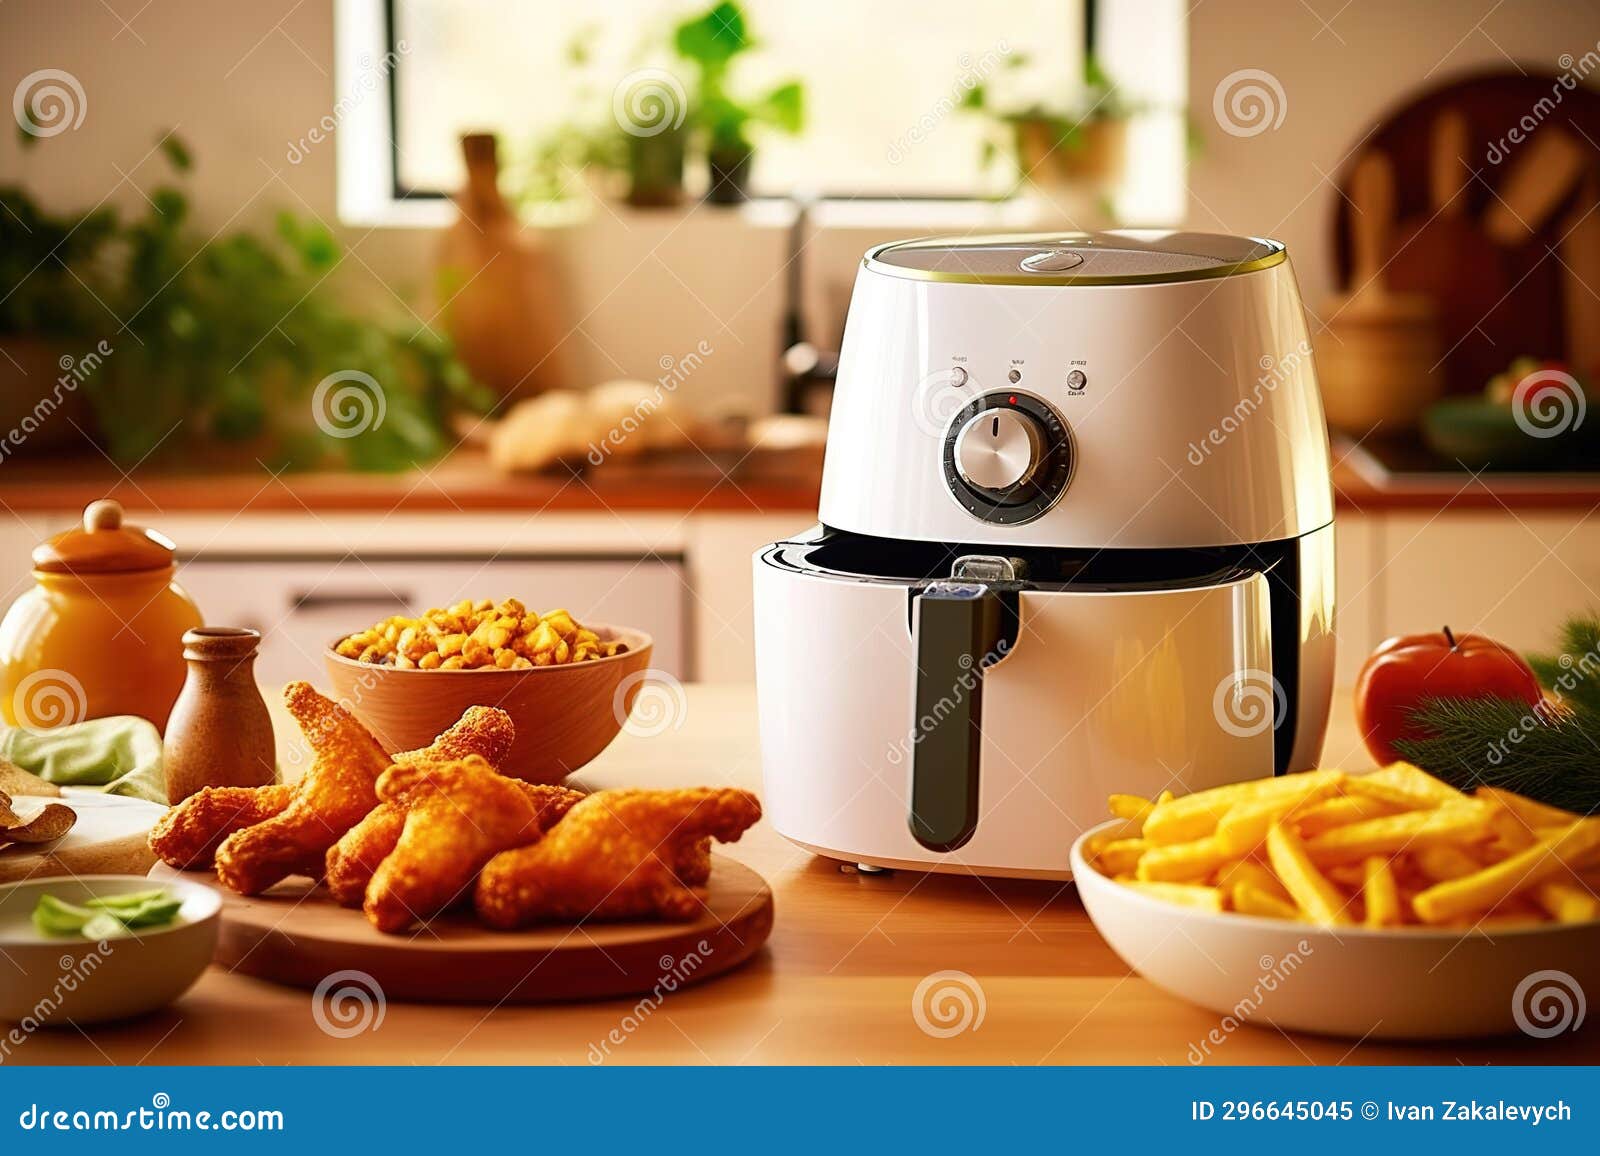 Air fryer or free oil machine with french fries on basket with small plant  and wooden table of the modern interior design kitchen, illustration created  by generative AI. ilustración de Stock